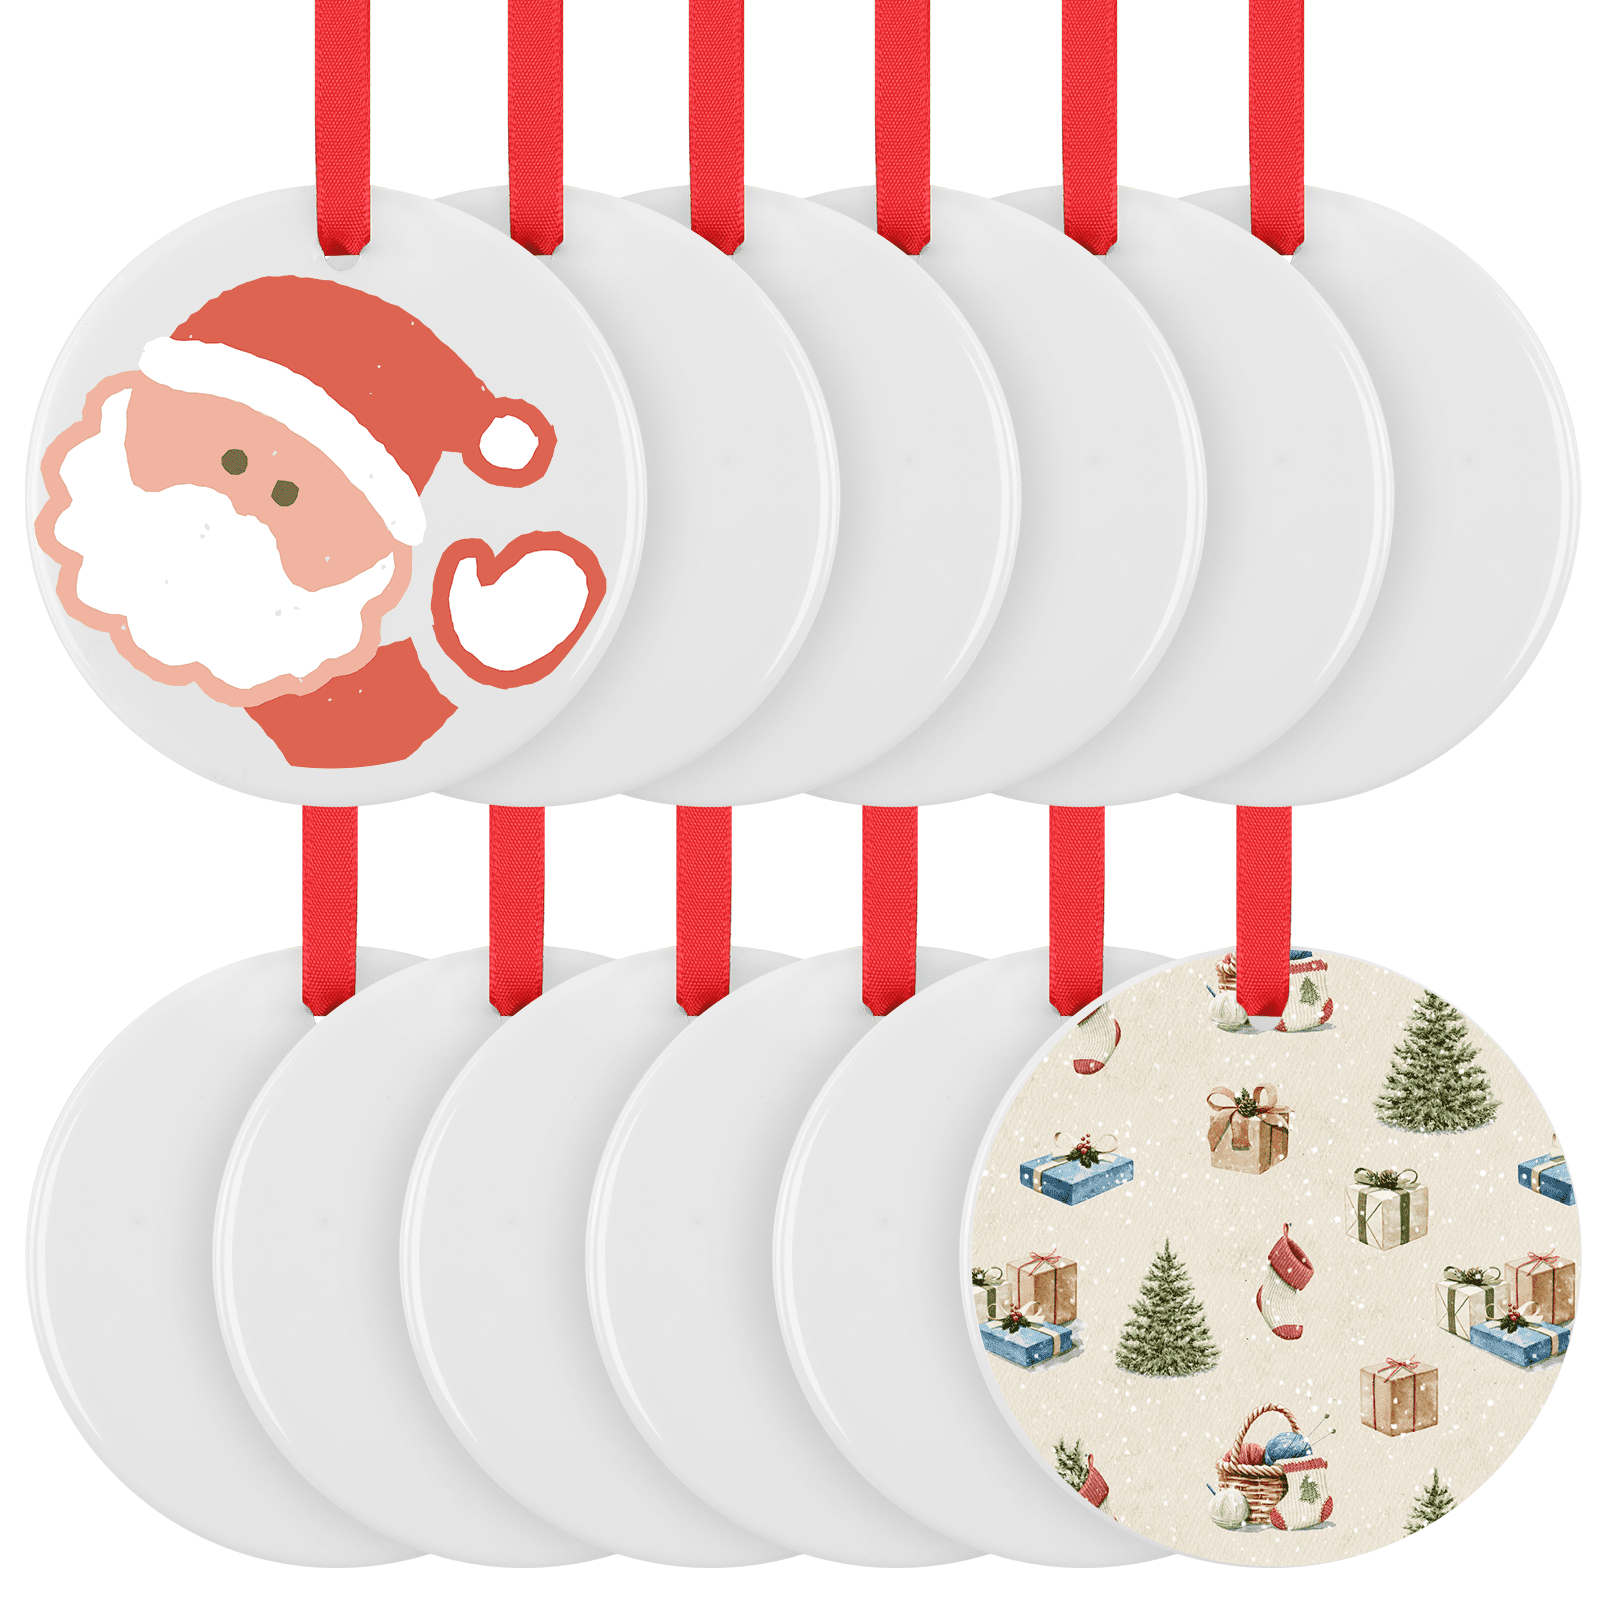 HTVRONT Sublimation Ornament Blanks - 24Pcs Ceramic Sublimation Christmas  Ornament Blanks Sublimation Blanks Ornaments Bulk with Red Strings for